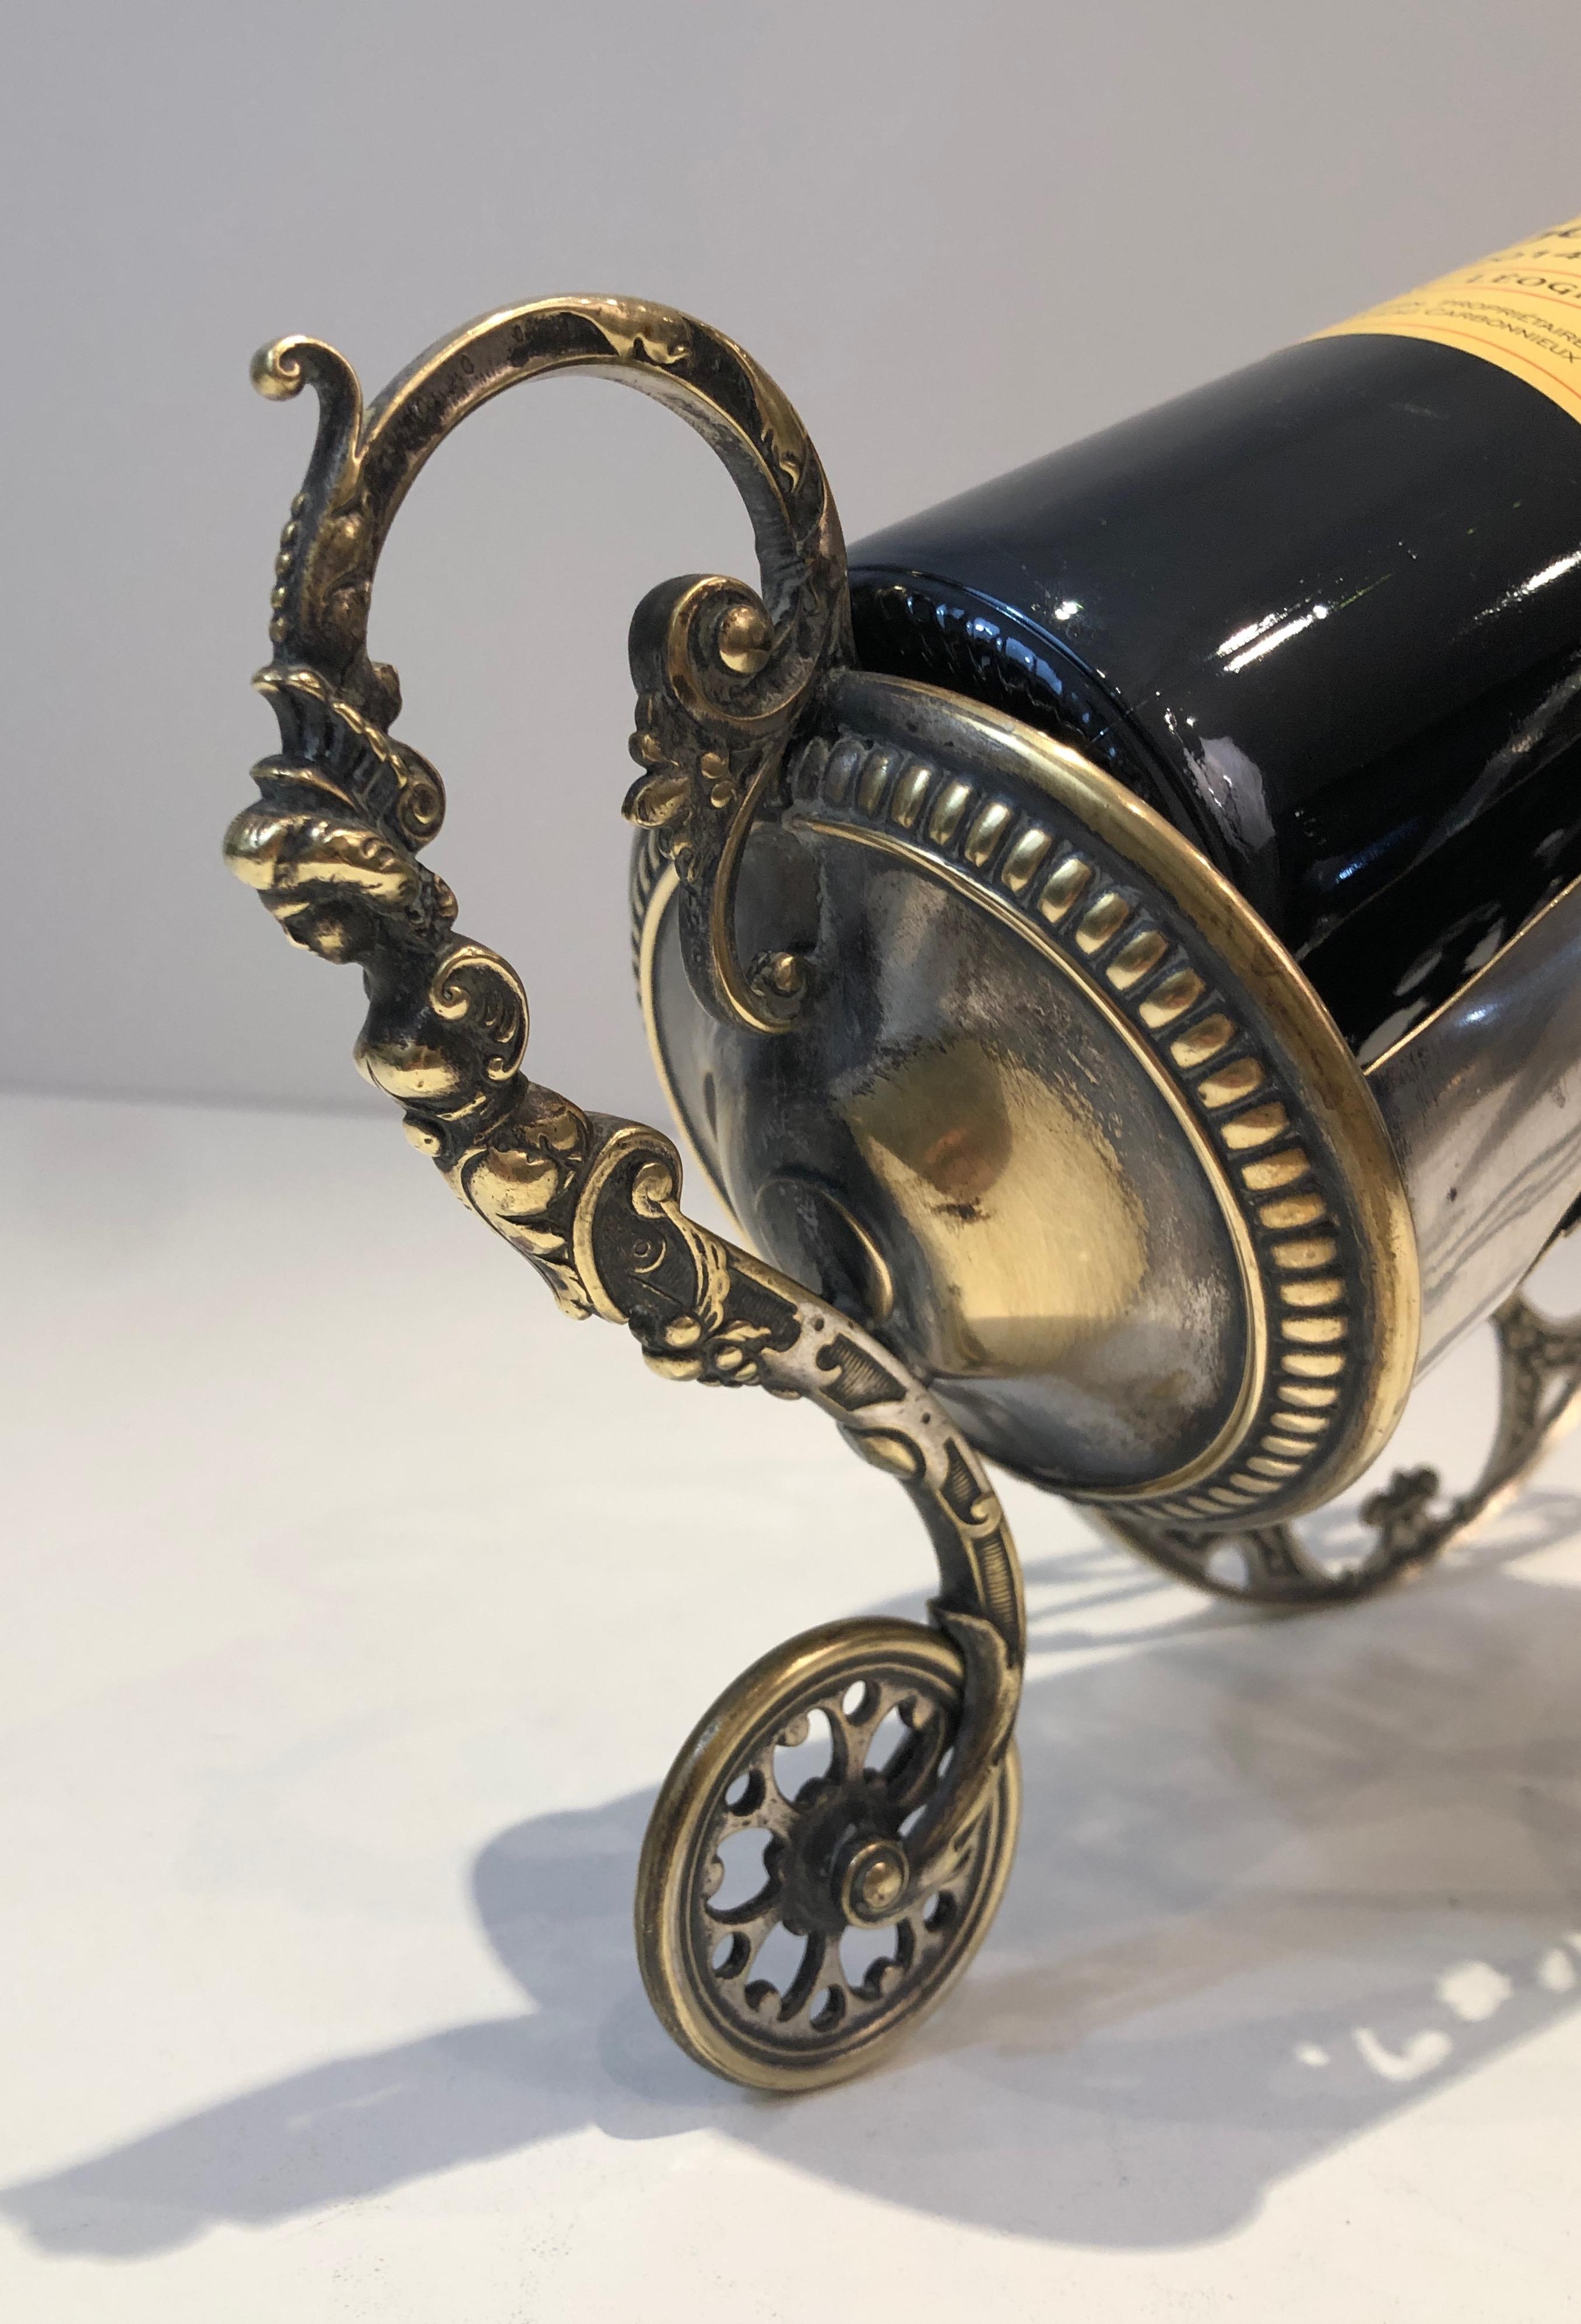 Late 19th Century Silver Plated on Bronze Wine Decanter Showing a Cannon with Detailed Ornaments